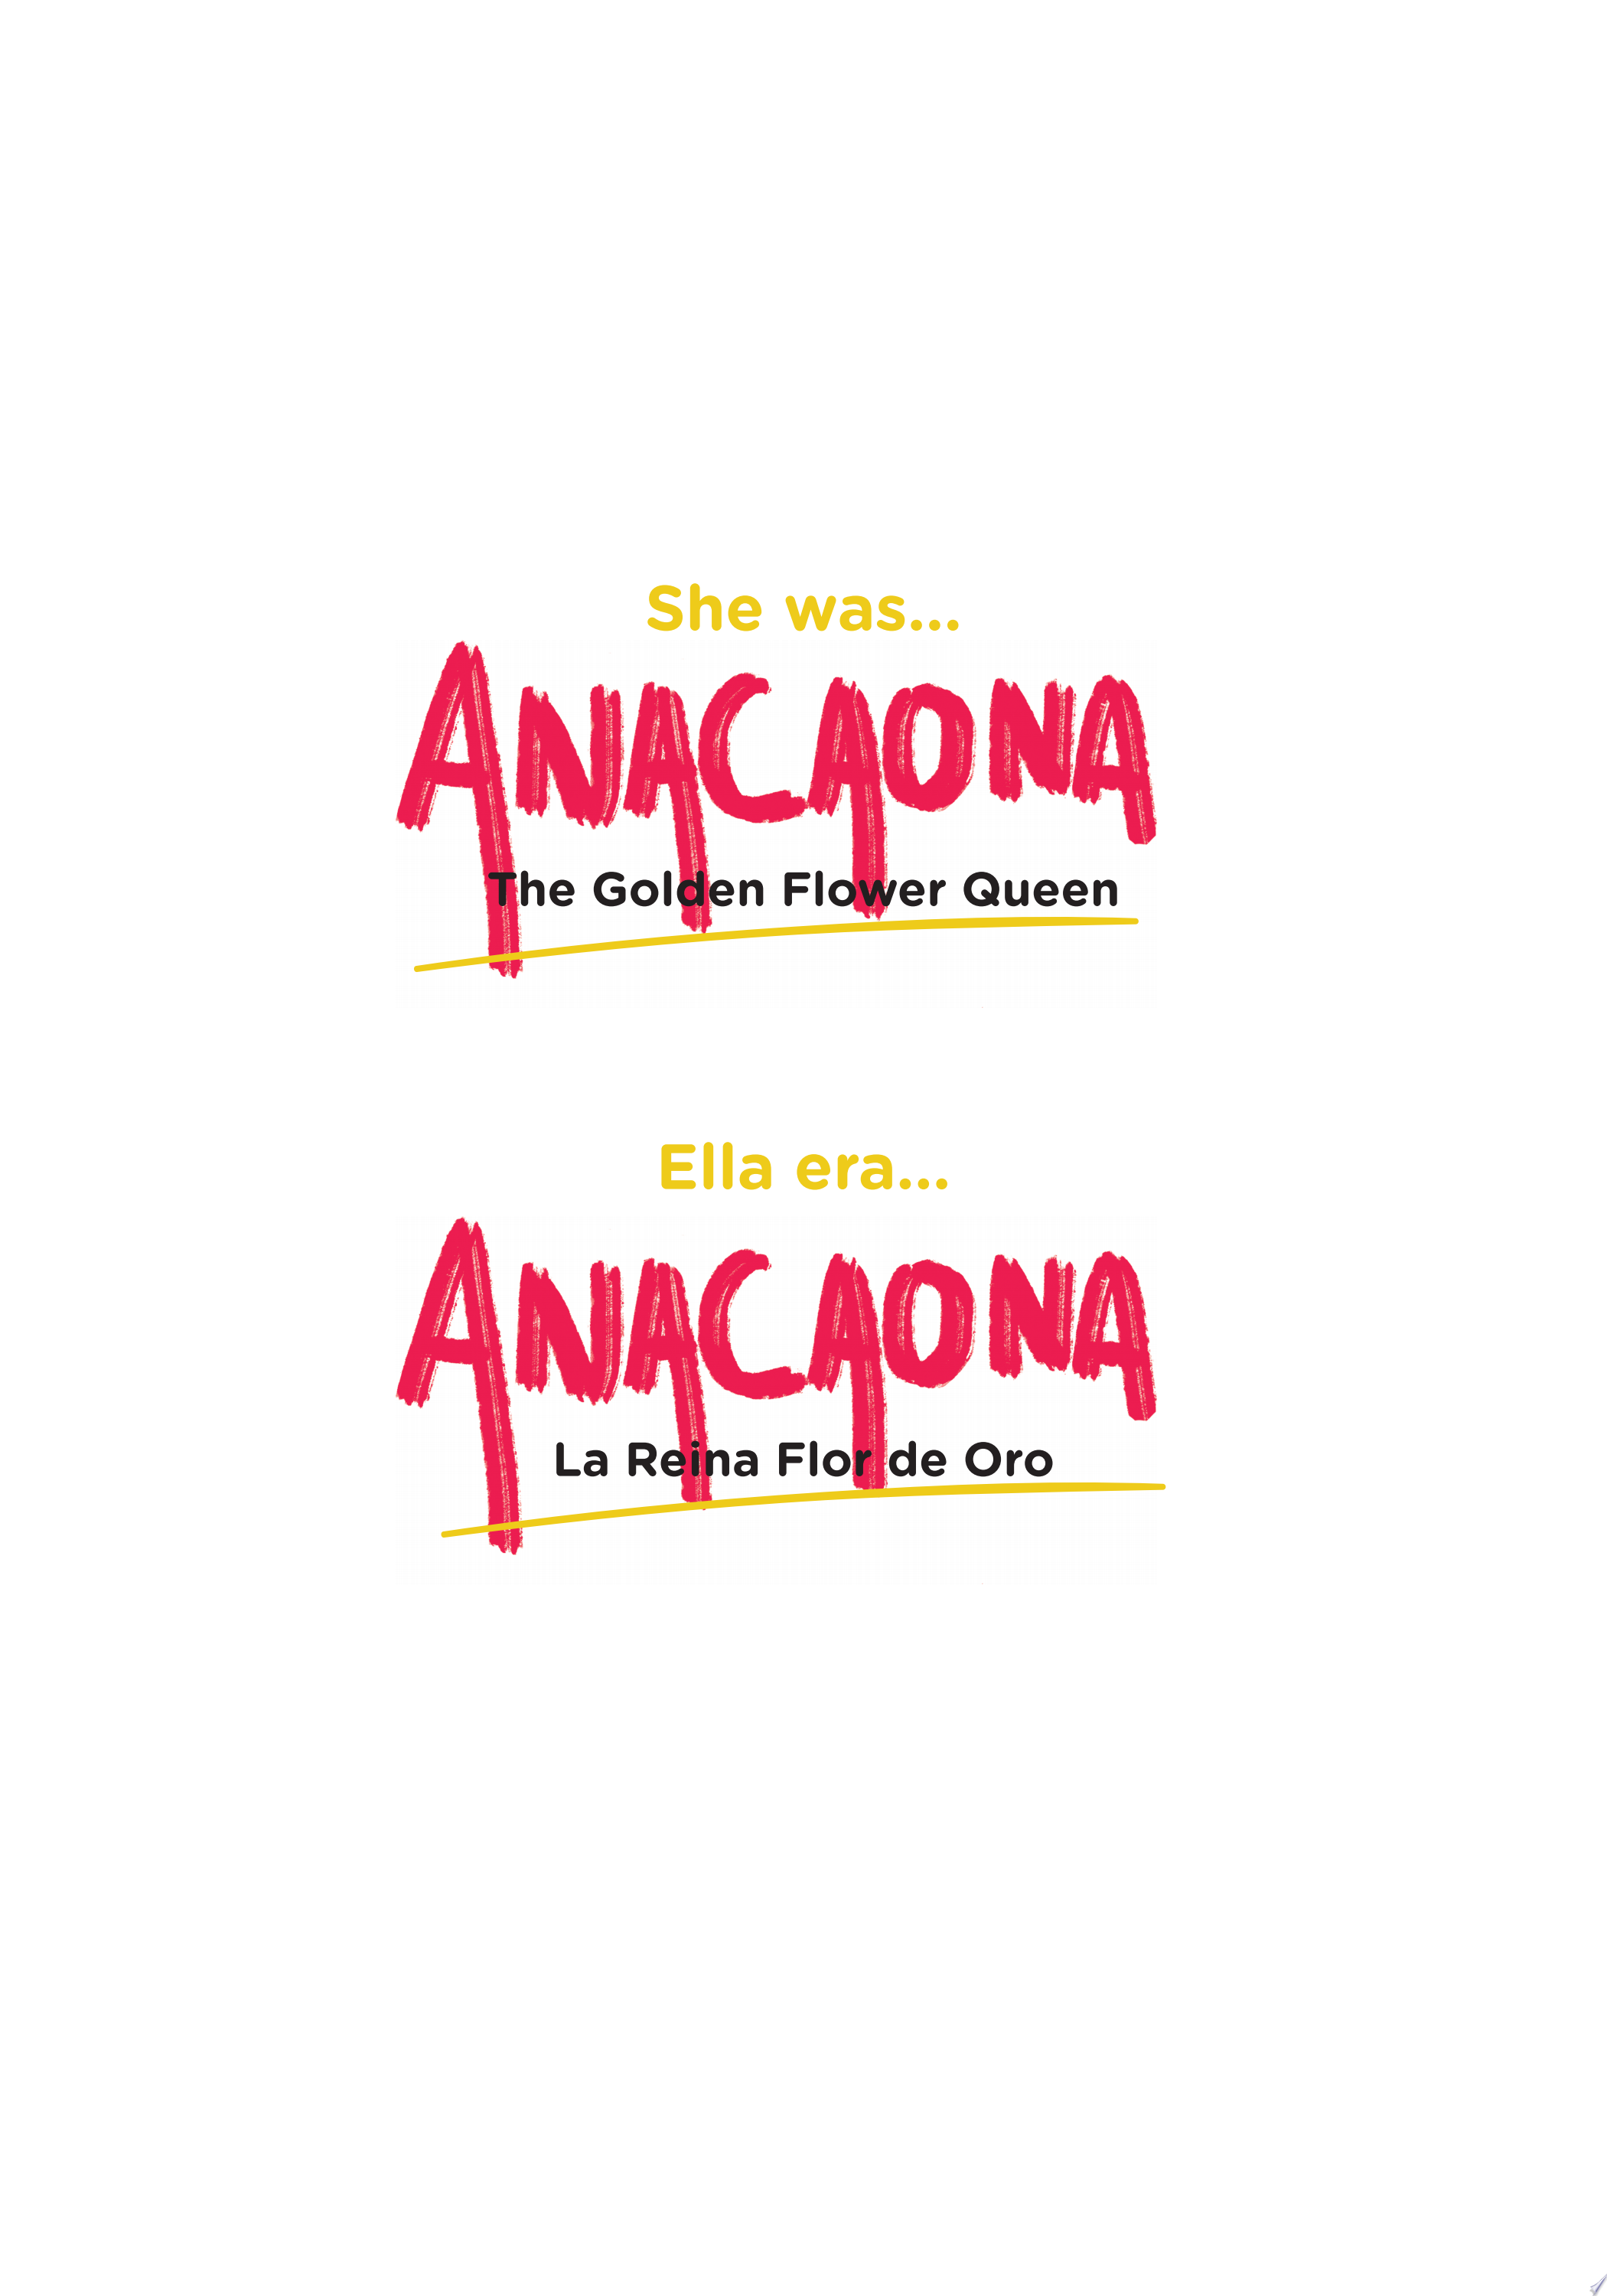 Image for "Anacaona, The Golden Flower Queen"